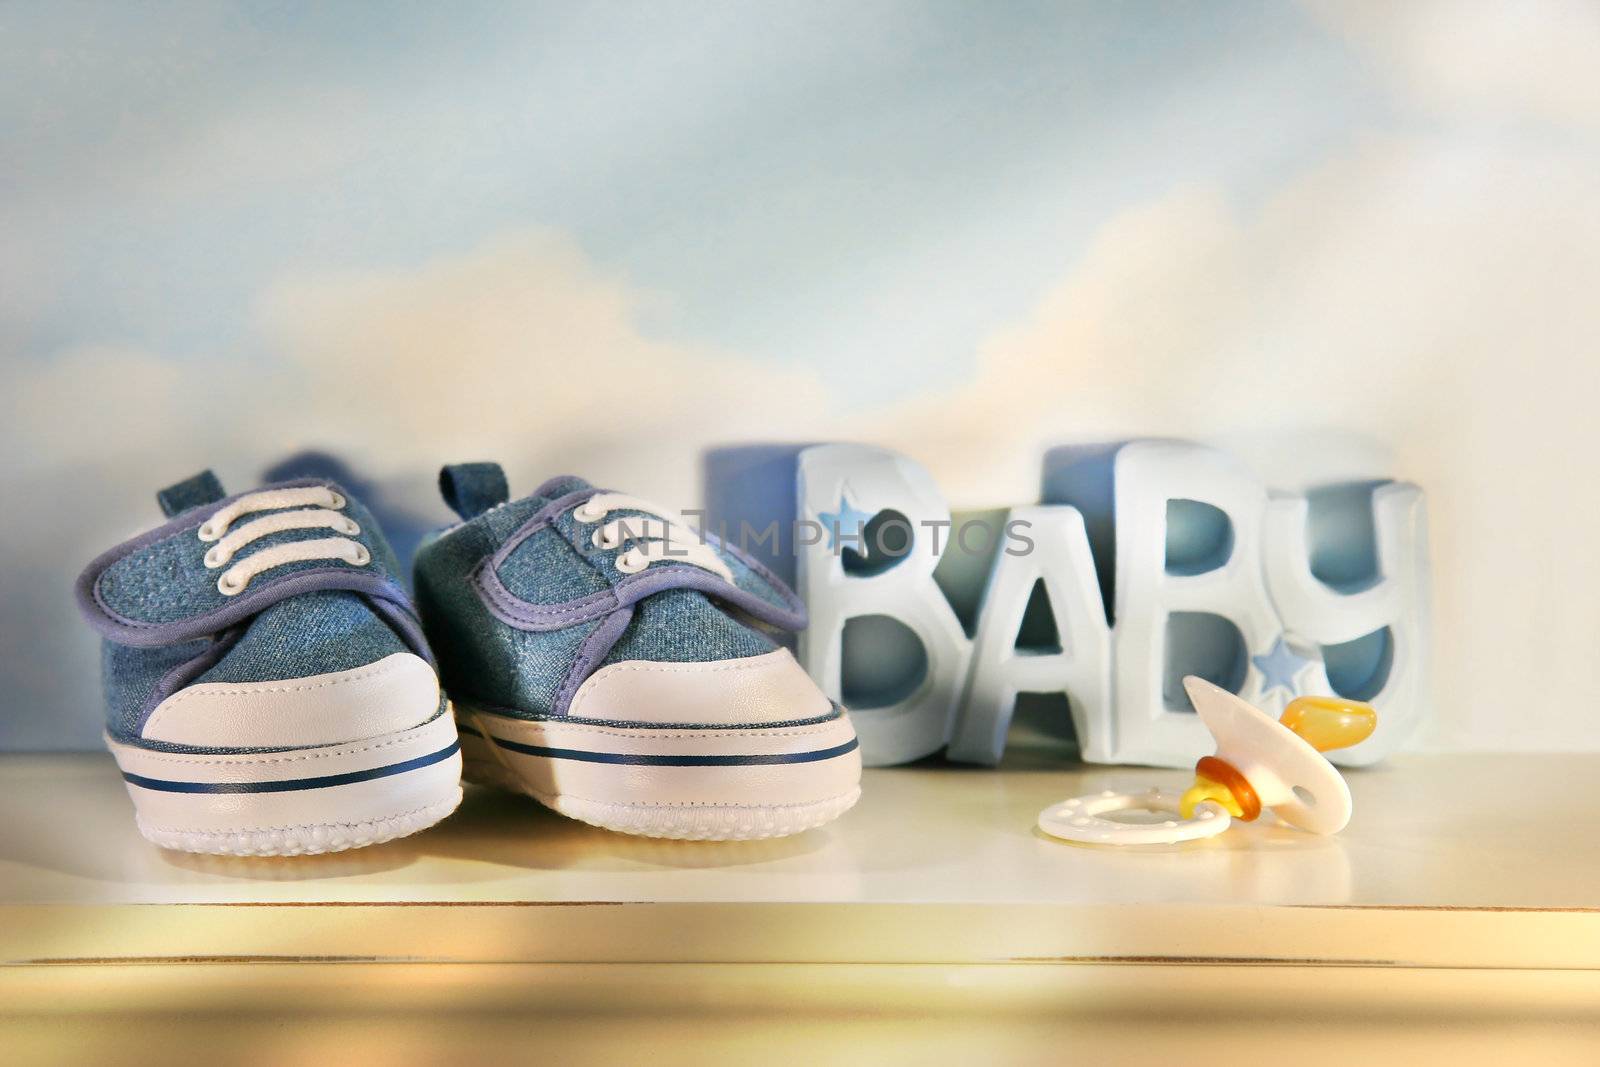 Baby denim shoes by Sandralise